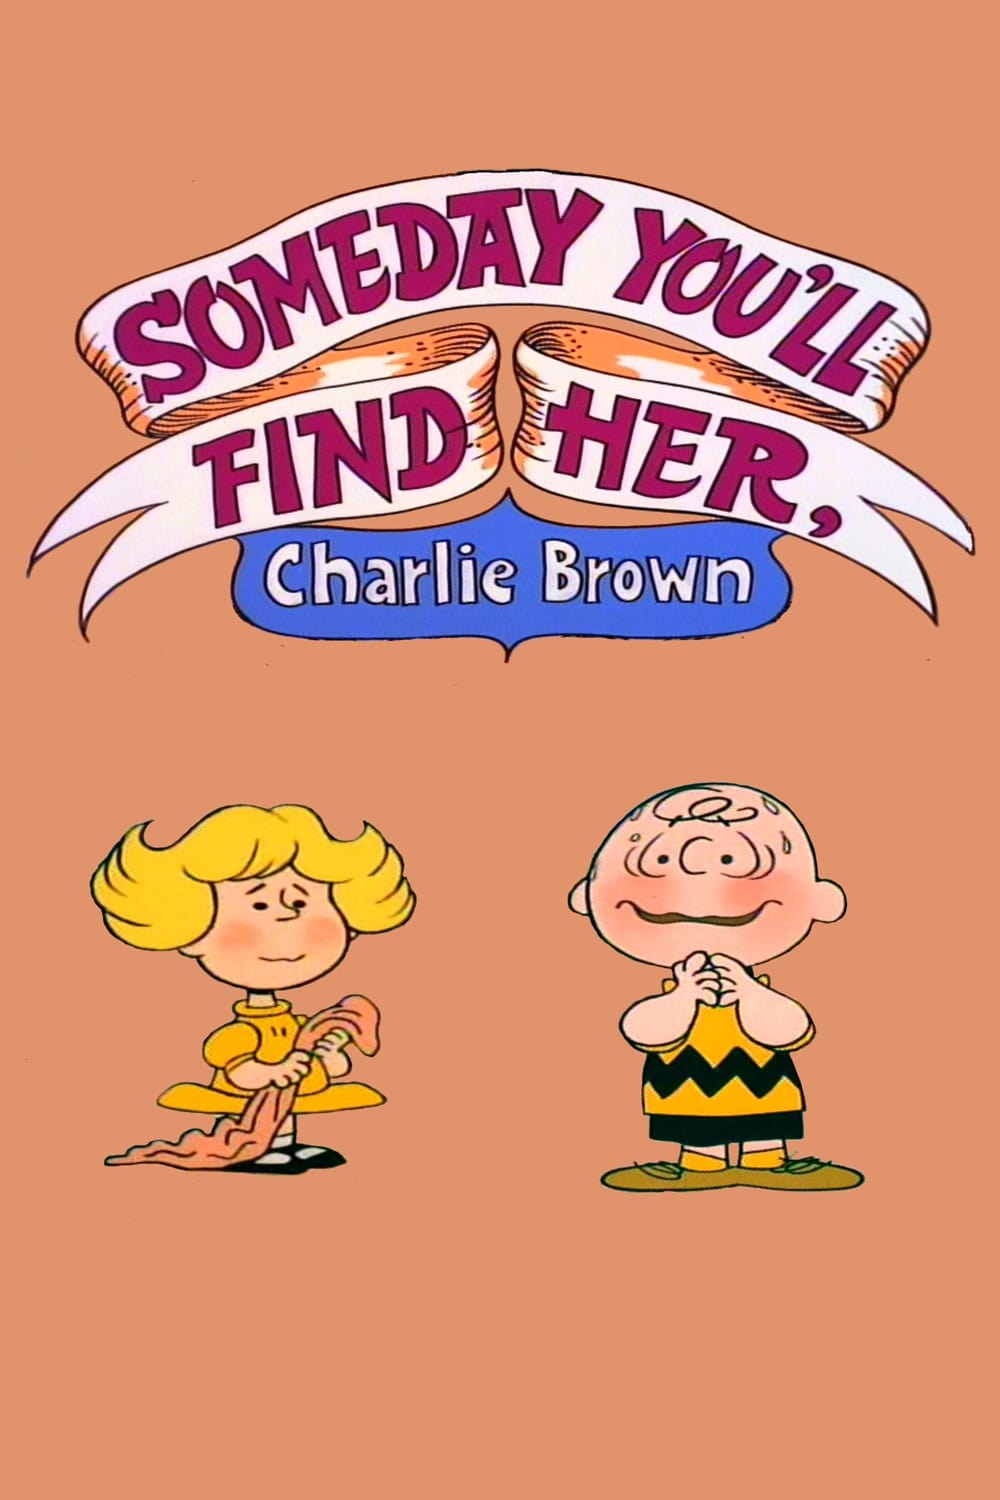 Someday You'll Find Her, Charlie Brown (1981)